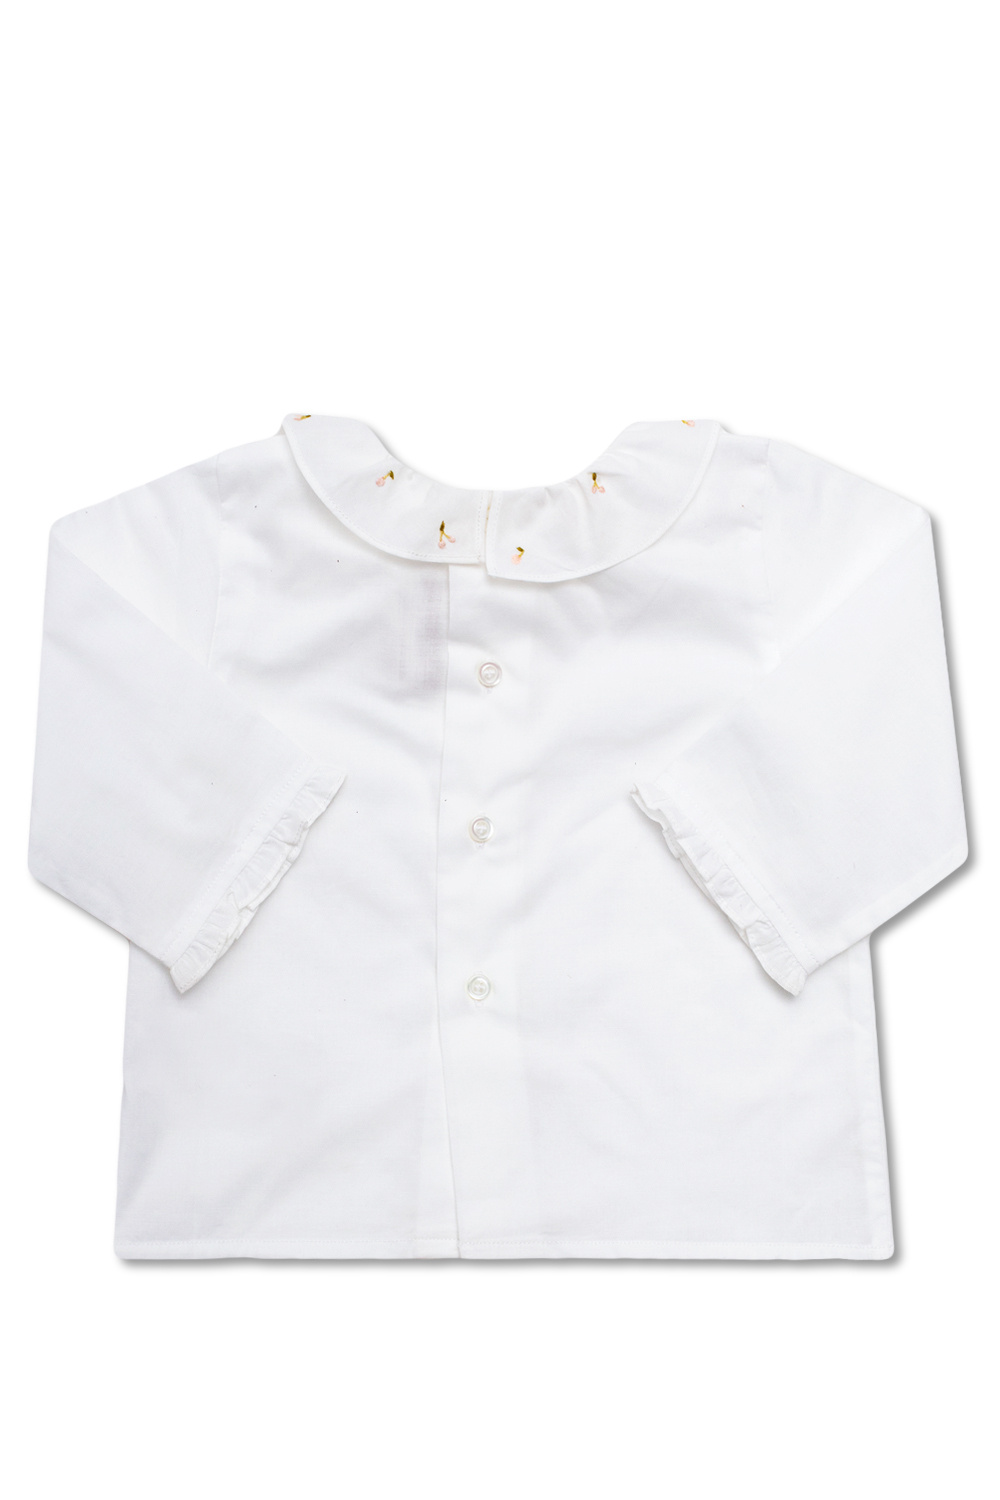 Bonpoint  Top with long sleeves